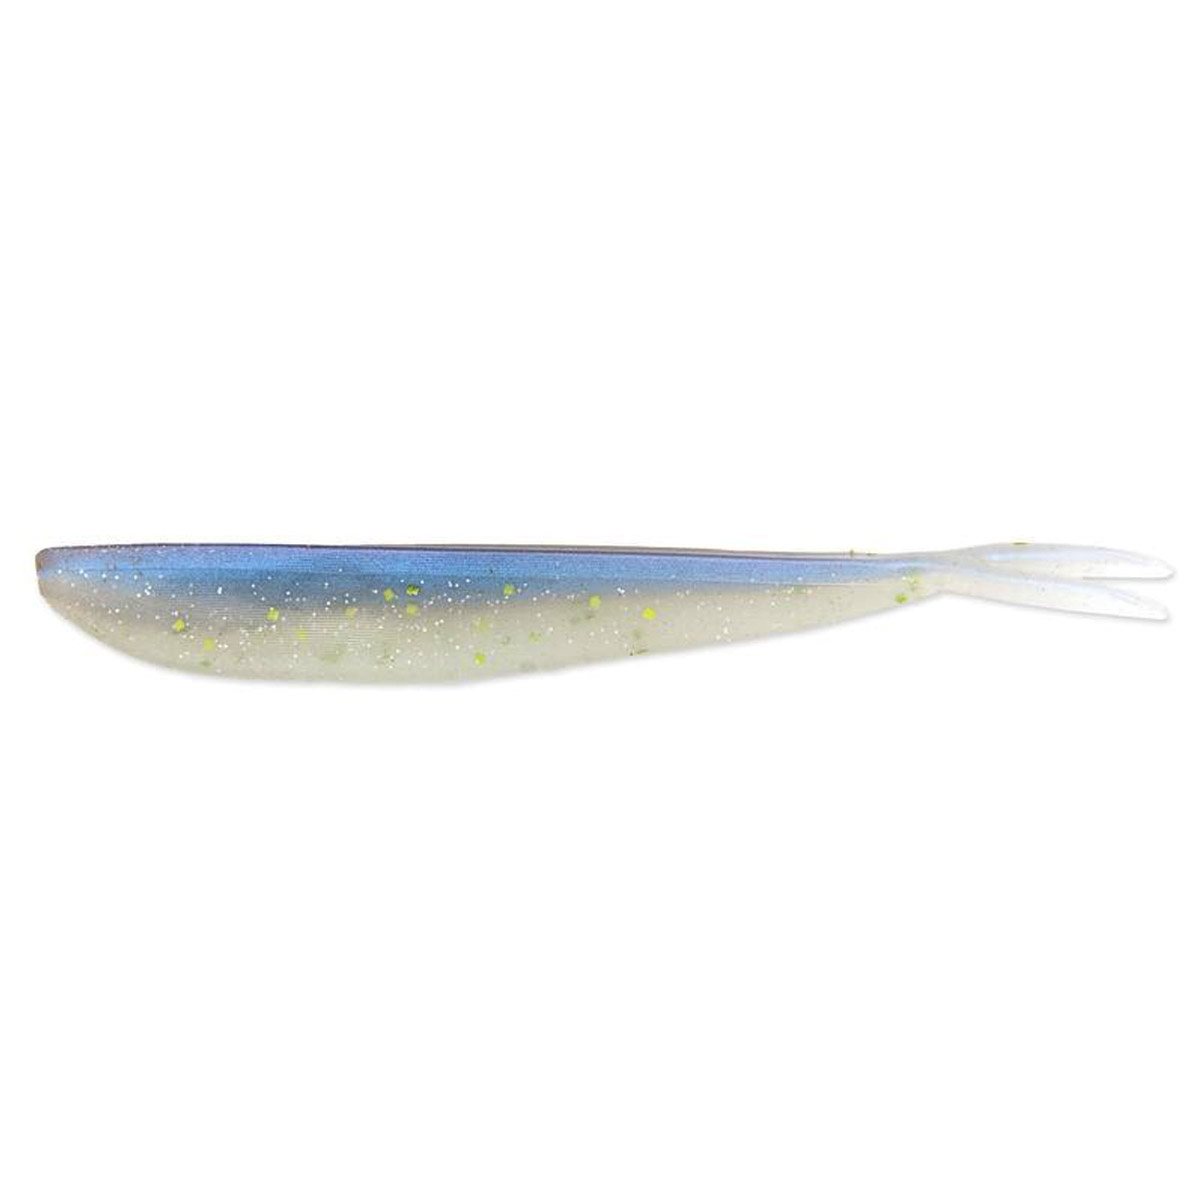 Lunker City Fin-S Fish 5,75 Inch -  Sexy Shiner